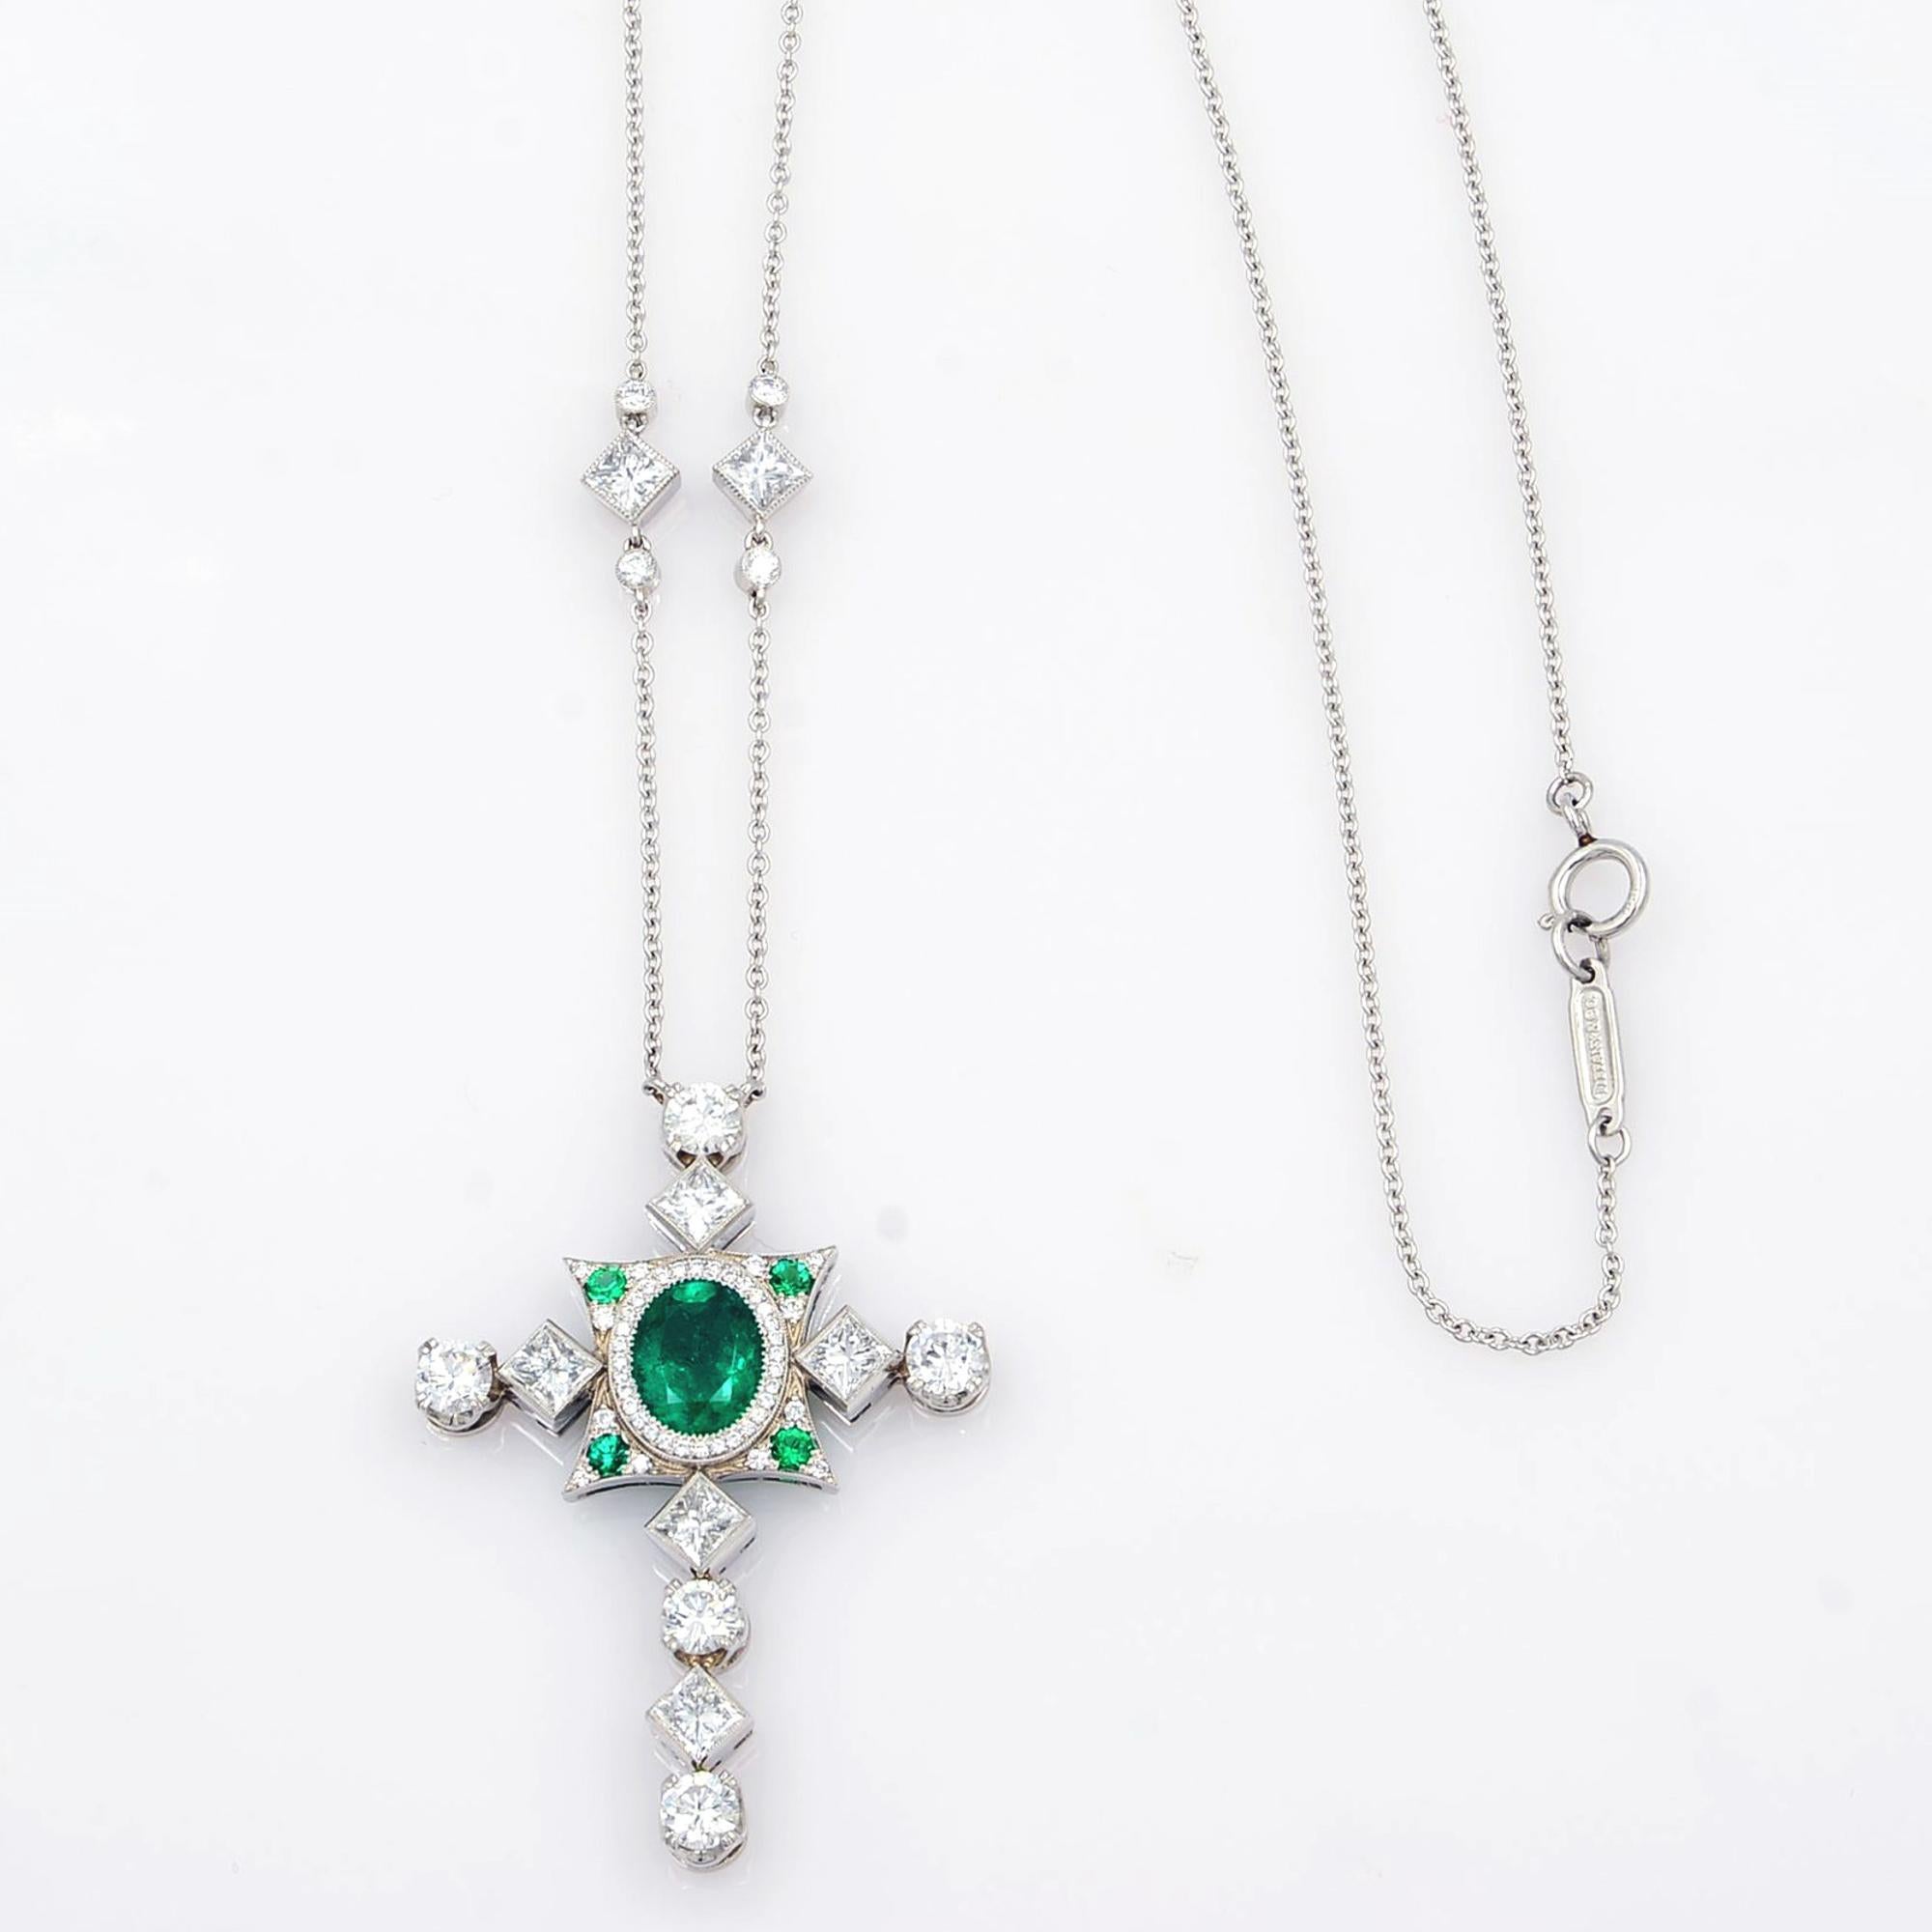 This gorgeous necklace features timeless beauty and superlative craftsmanship with a striking stylized cross beautifully crafted in platinum and placed on a diamond by the yard chain. A romantic jewel for your neck with glorious green and white